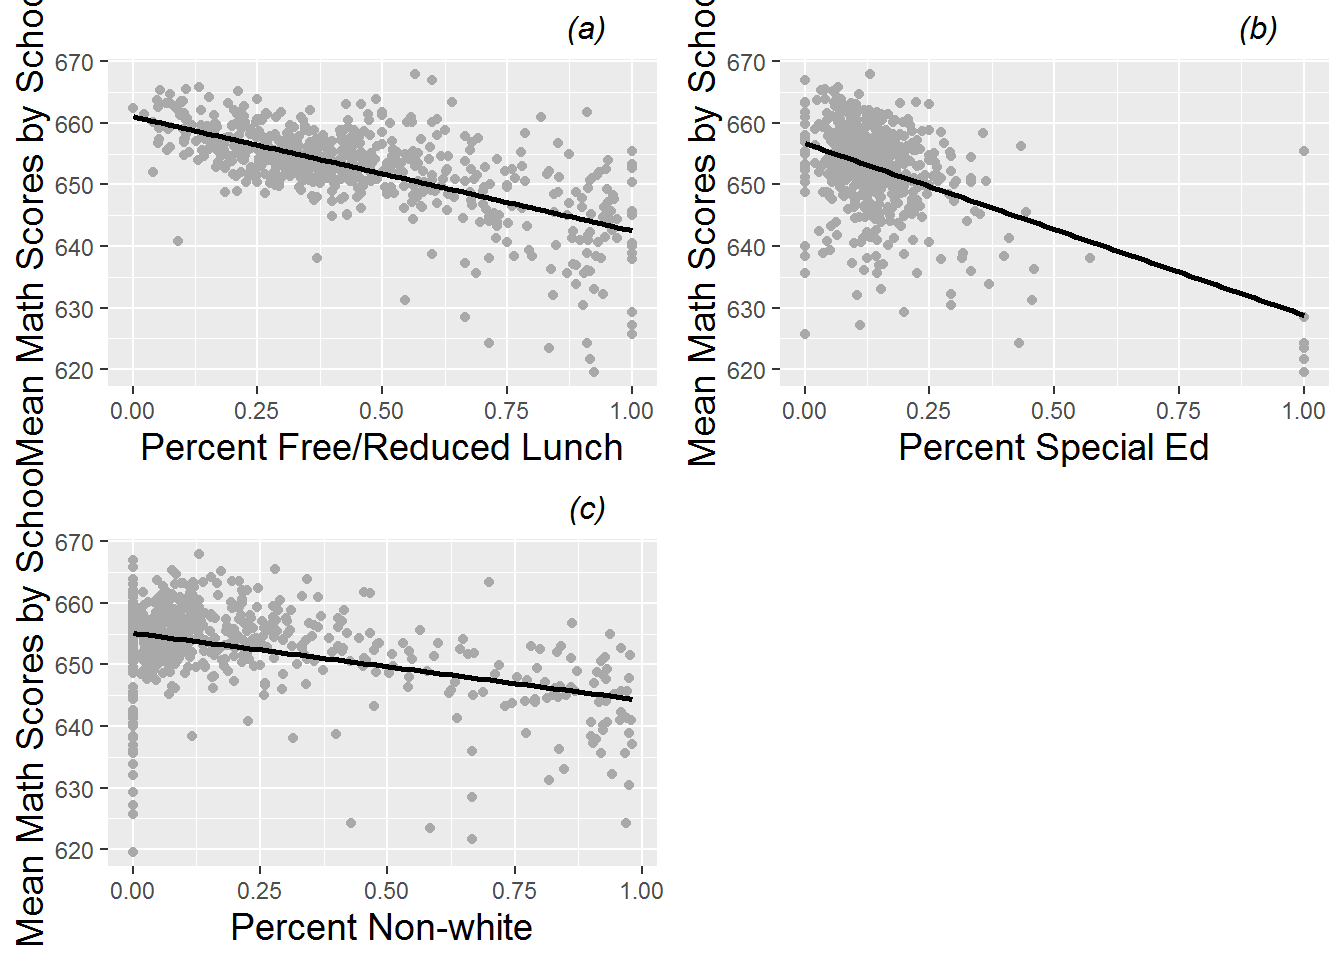  Scatterplots of average MCA math scores by (a) percent free and reduced lunch, (b) percent special education, and (c) percent non-white in a school.